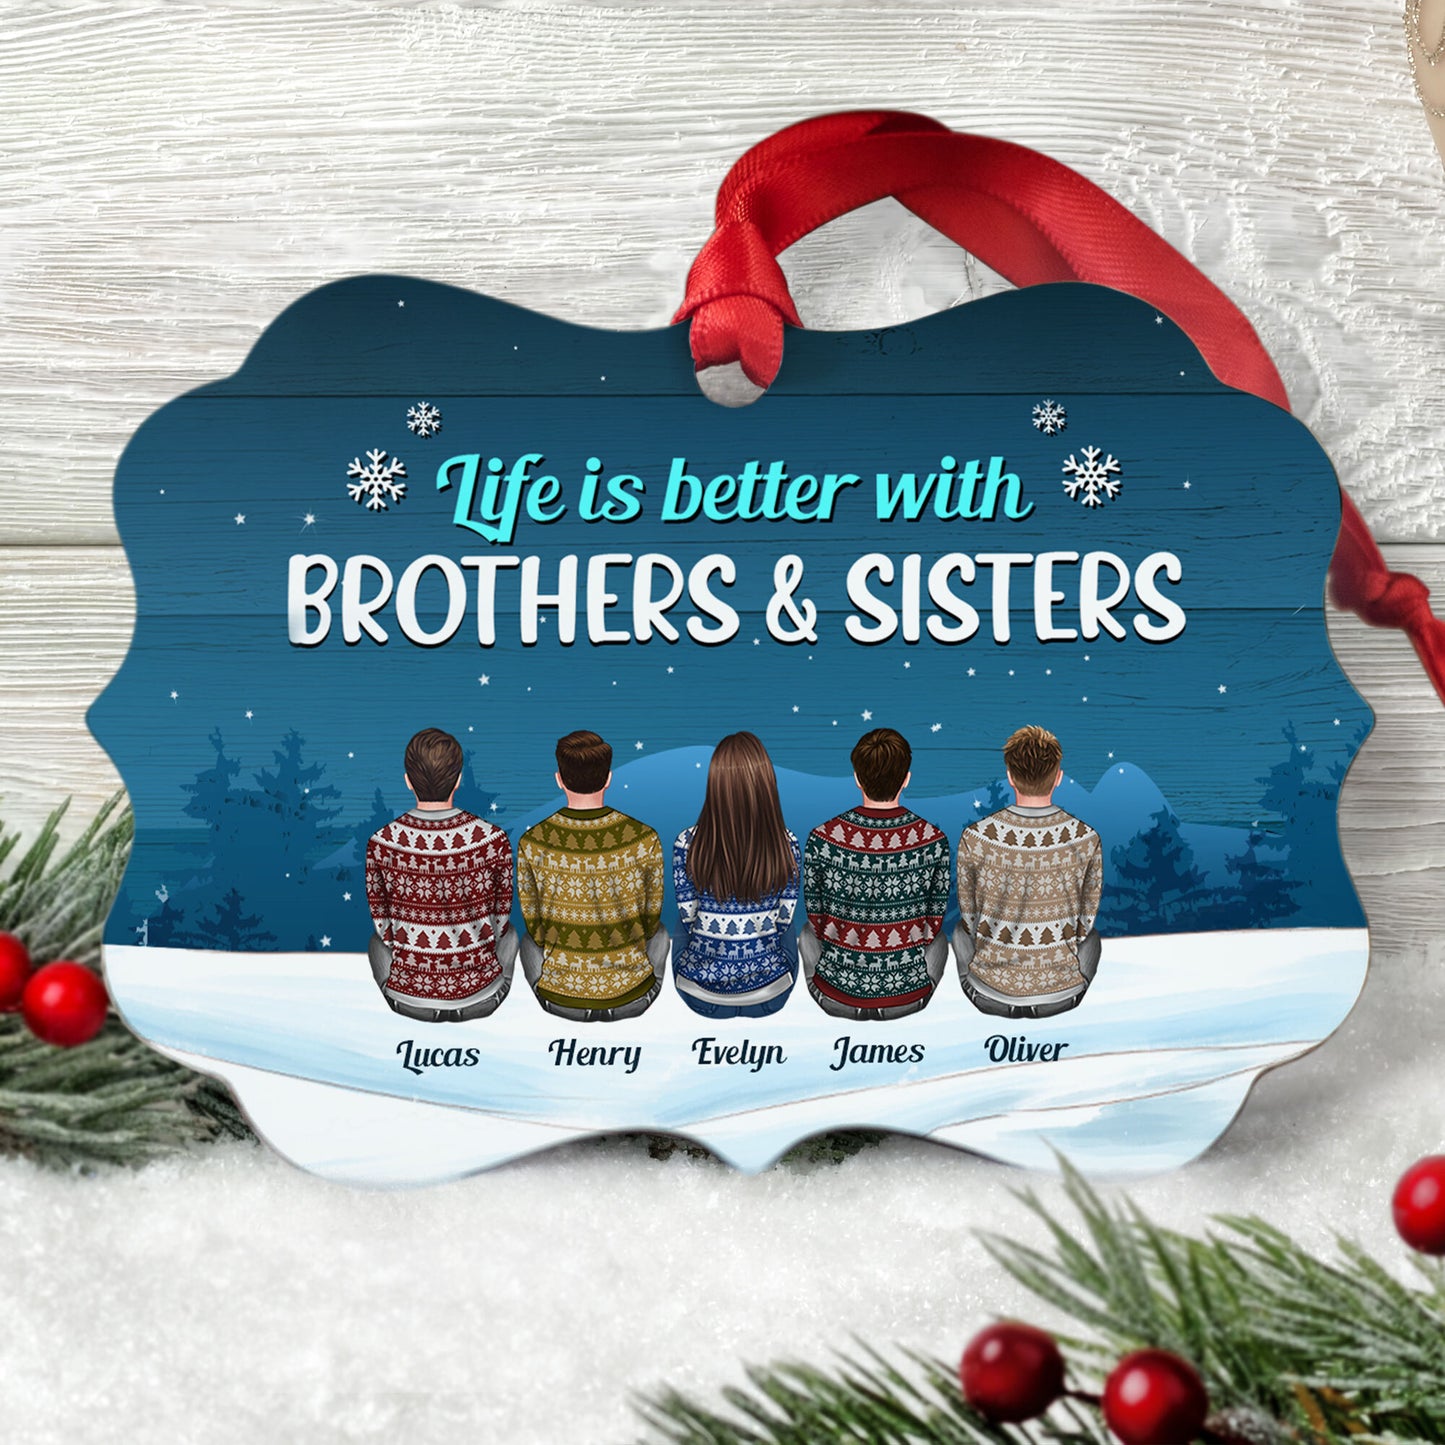 Life Is Better With Brothers And Sisters 2 - Personalized Aluminum Ornament - Ugly Christmas Sweater Sitting